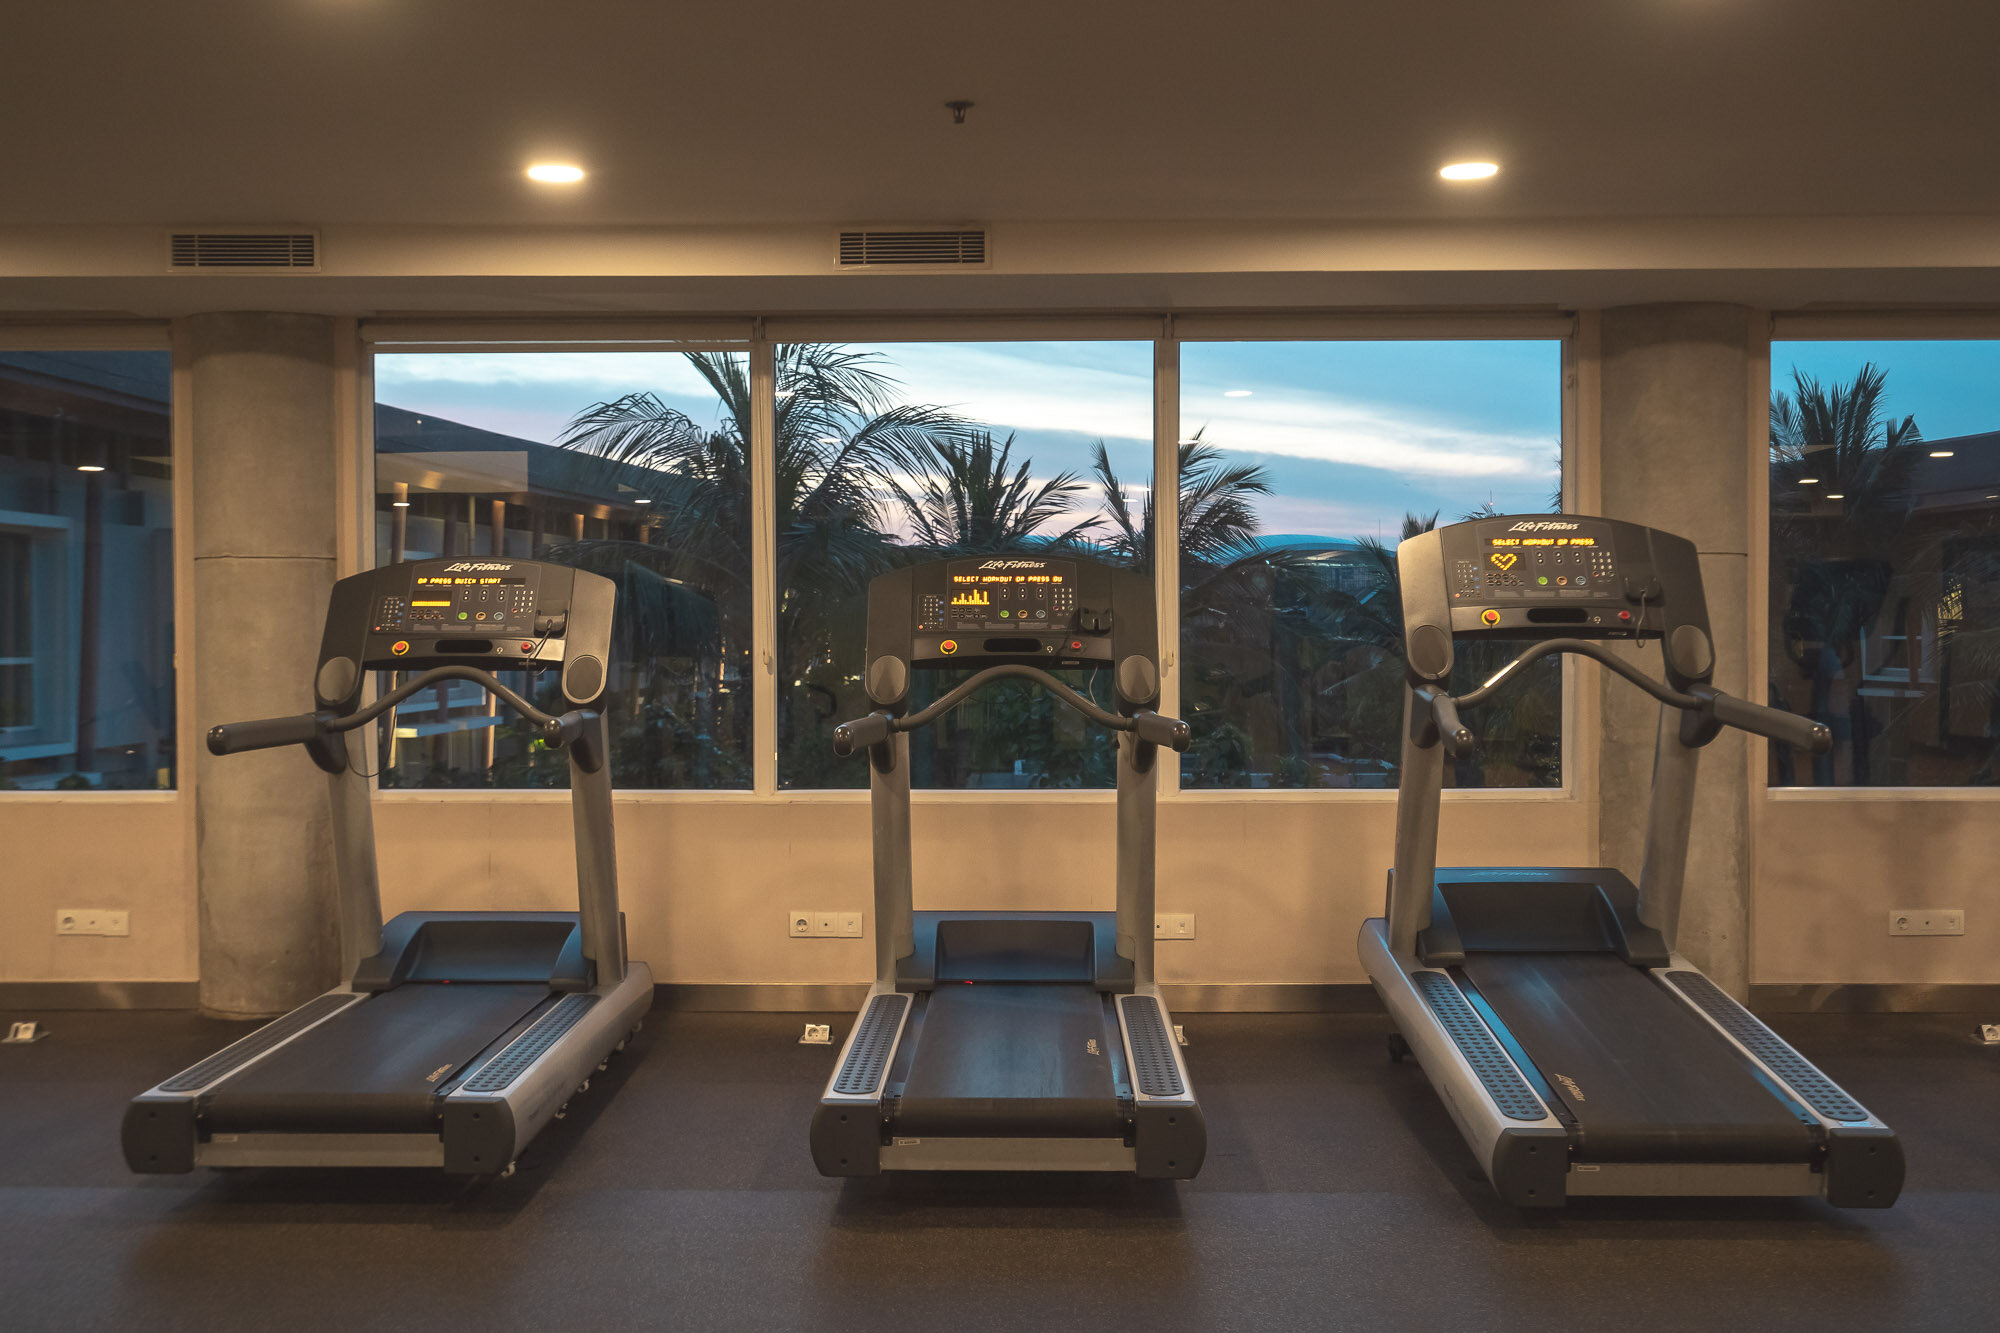 Treadmills with a nice view